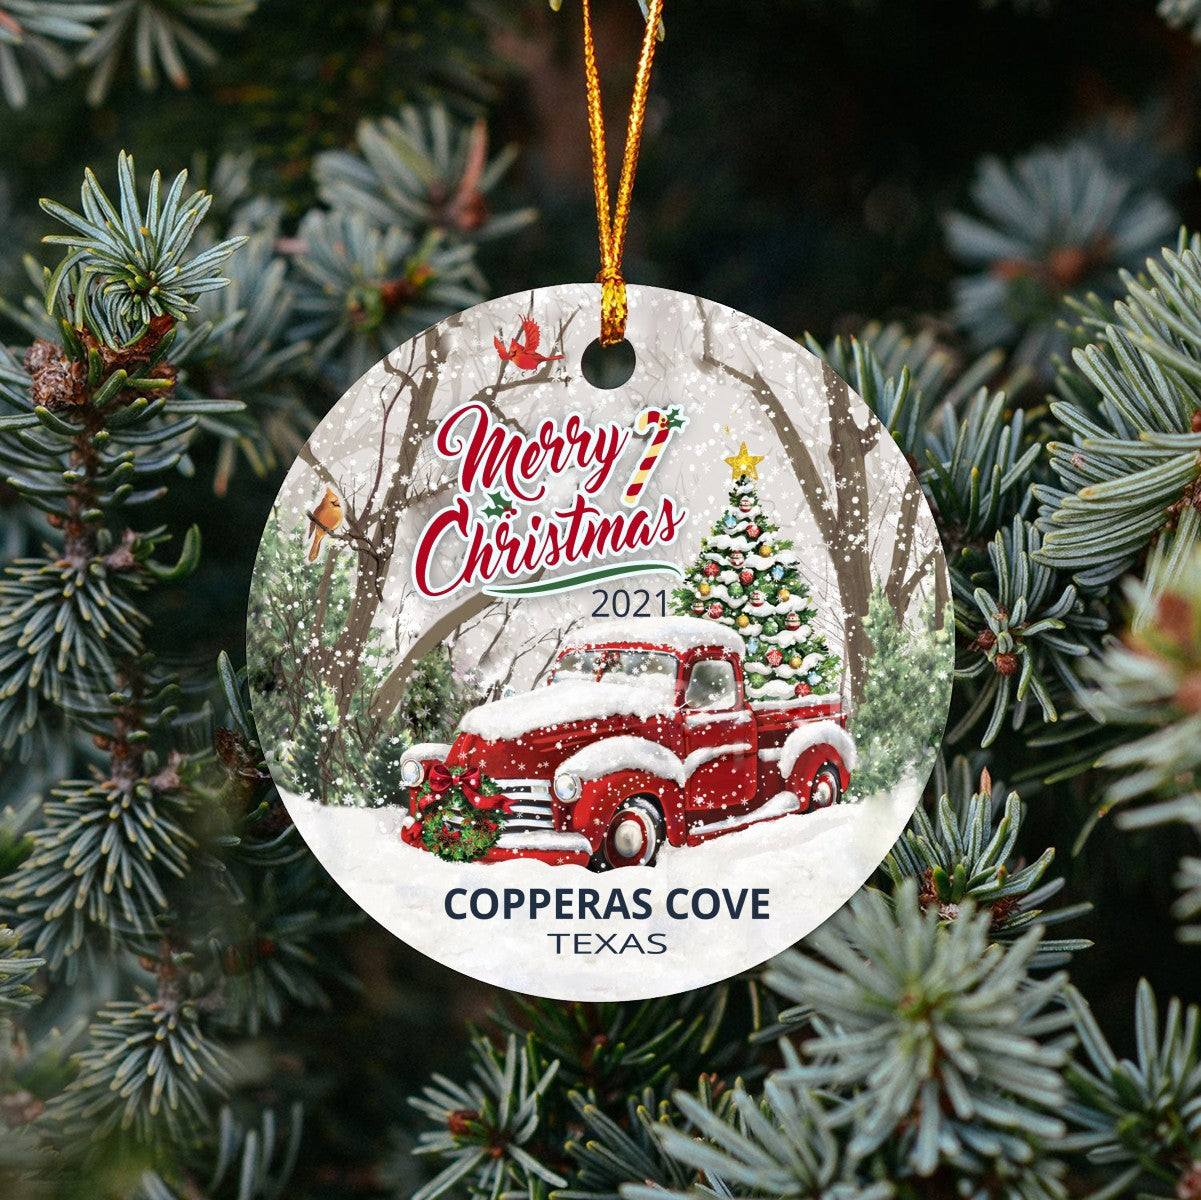 Christmas Tree Ornaments Copperas Cove - Ornament Customize With Name City And State Copperas Cove Texas TX - Red Truck Xmas Ornaments 3'' Plastic Gift For Family, Friend And Housewarming